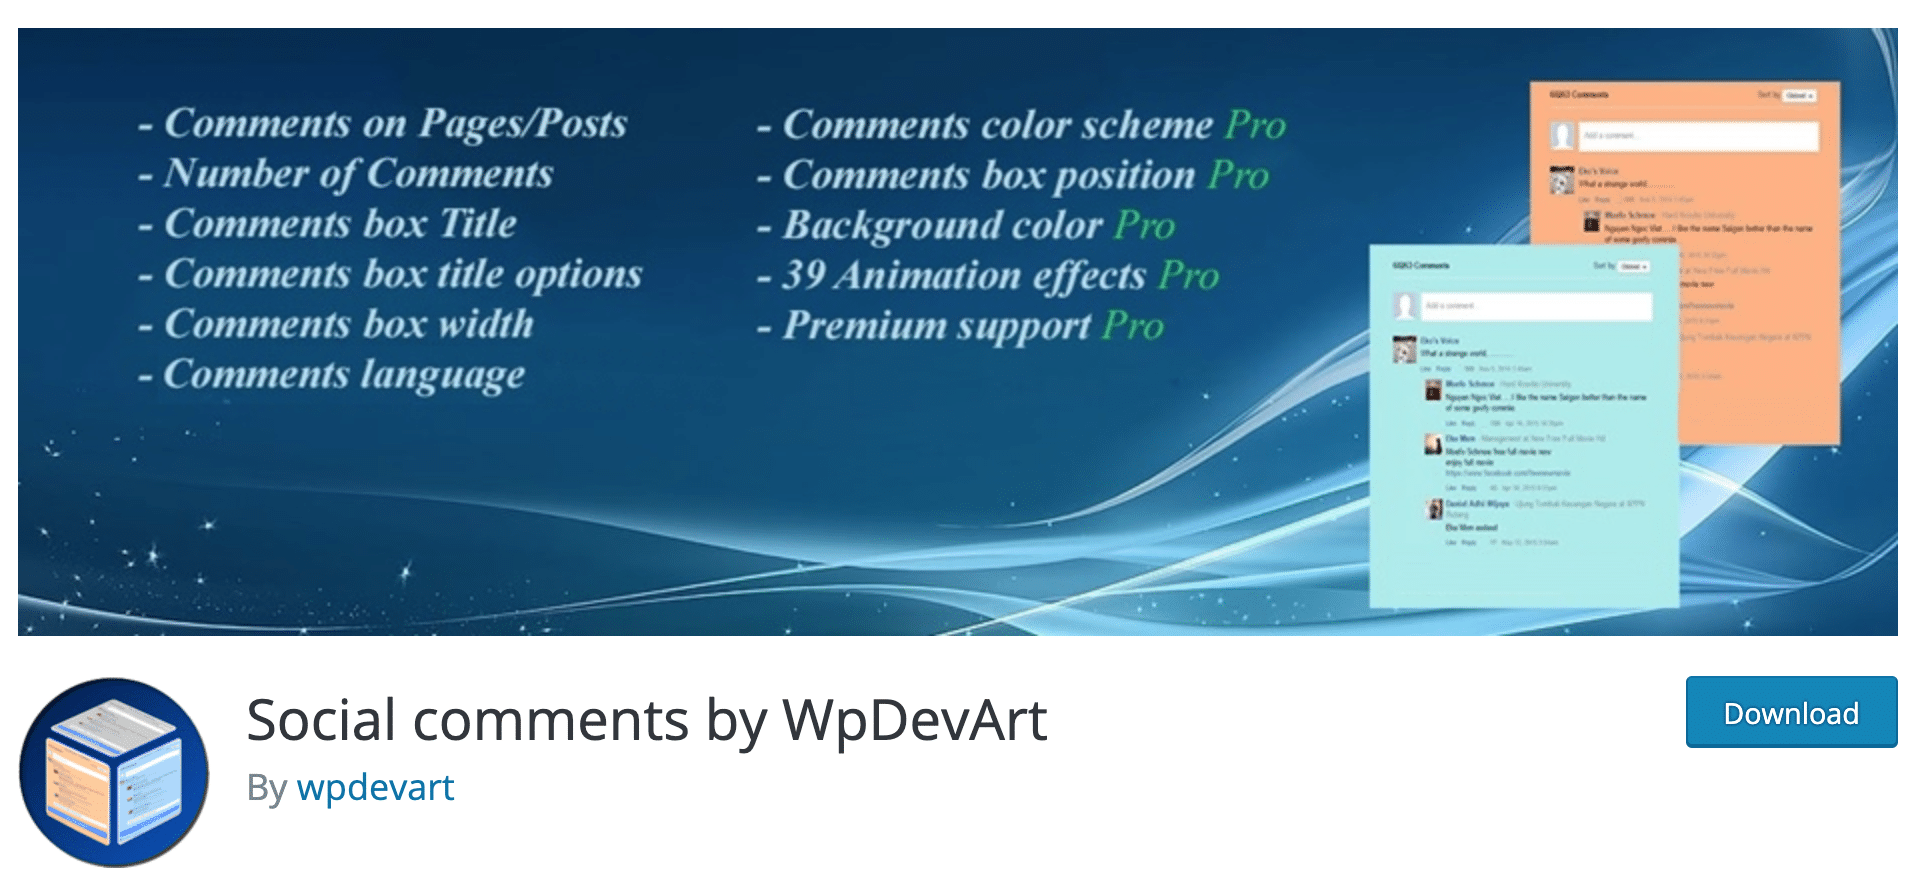 social comments by wpdevart